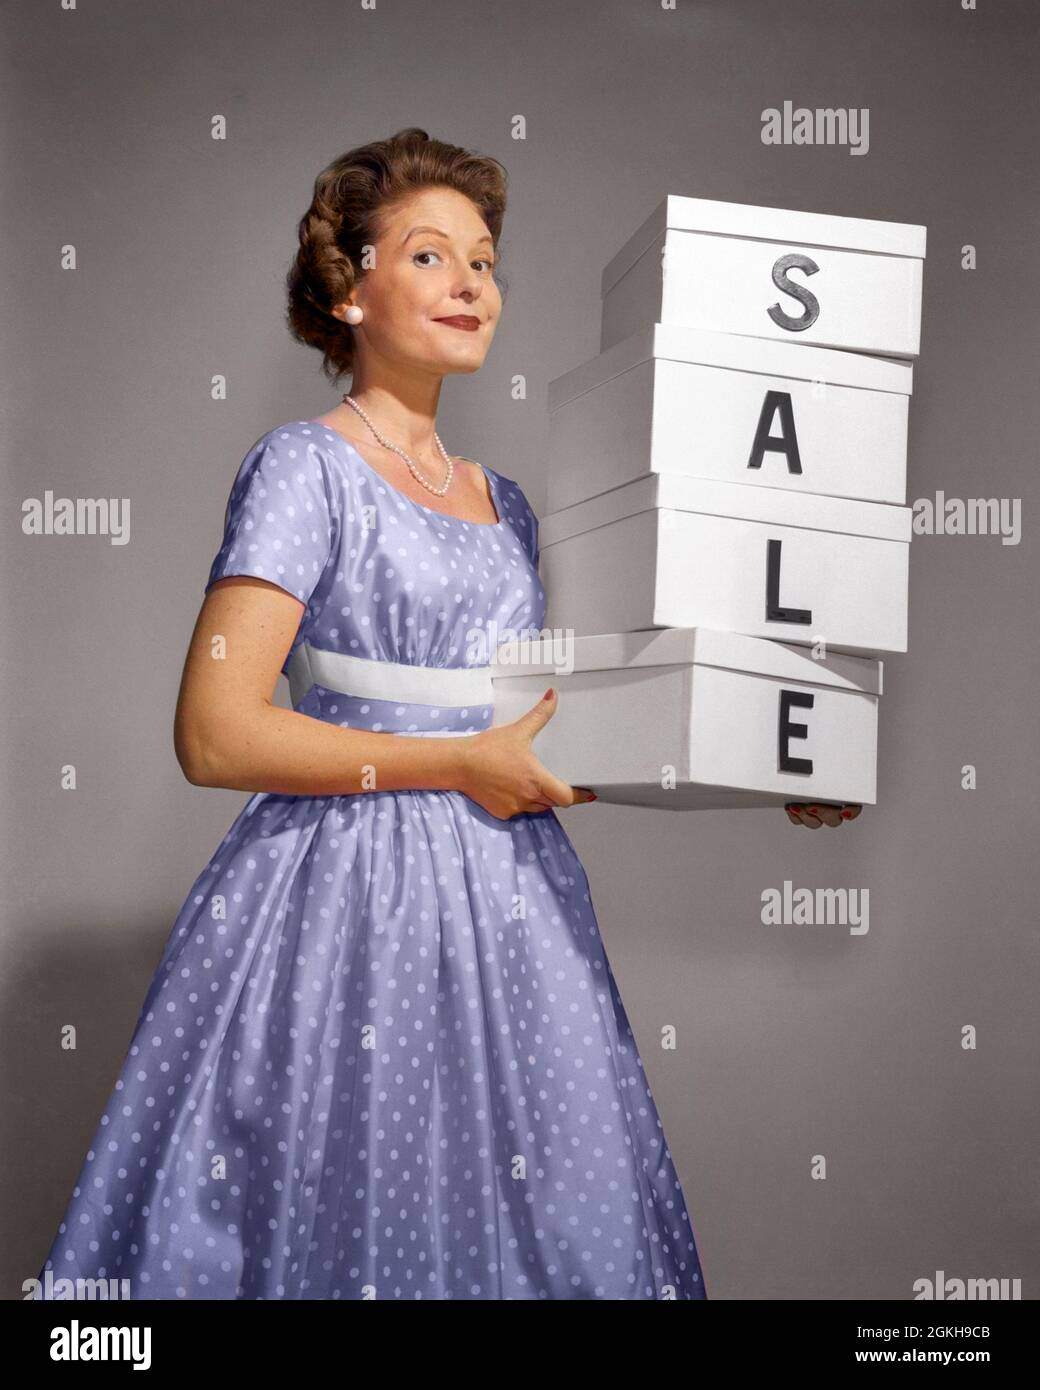 1960s WOMAN IN POLKA-DOT DRESS LOOKING AT CAMERA HOLDING A STACK OF 4 BOXES WITH ONE CHARACTER CENTERED ON EACH SPELLING SALE - g4967c DEB001 HARS NOSTALGIA BOXES OLD FASHION 1 JUVENILE STYLE WELCOME COMMUNICATION SPELLING ADVERTISING BALANCE INFORMATION LIFESTYLE FEMALES HEADS STUDIO SHOT PEOPLE CHILDREN HALF-LENGTH LADIES PERSONS CHARACTER CONFIDENCE BALANCING EYE CONTACT DOT FREEDOM GOALS SUCCESS POLKA CUSTOMER SERVICE CHOICE EXCITEMENT INNOVATION POLKA DOTS POLKA-DOT OCCUPATIONS SMILES POLKA-DOTS CONNECTION POLKA-DOTTED POLKA DOT SPELL STYLISH SUPPORT DEB001 CENTERED DOTS PROMOTING Stock Photo